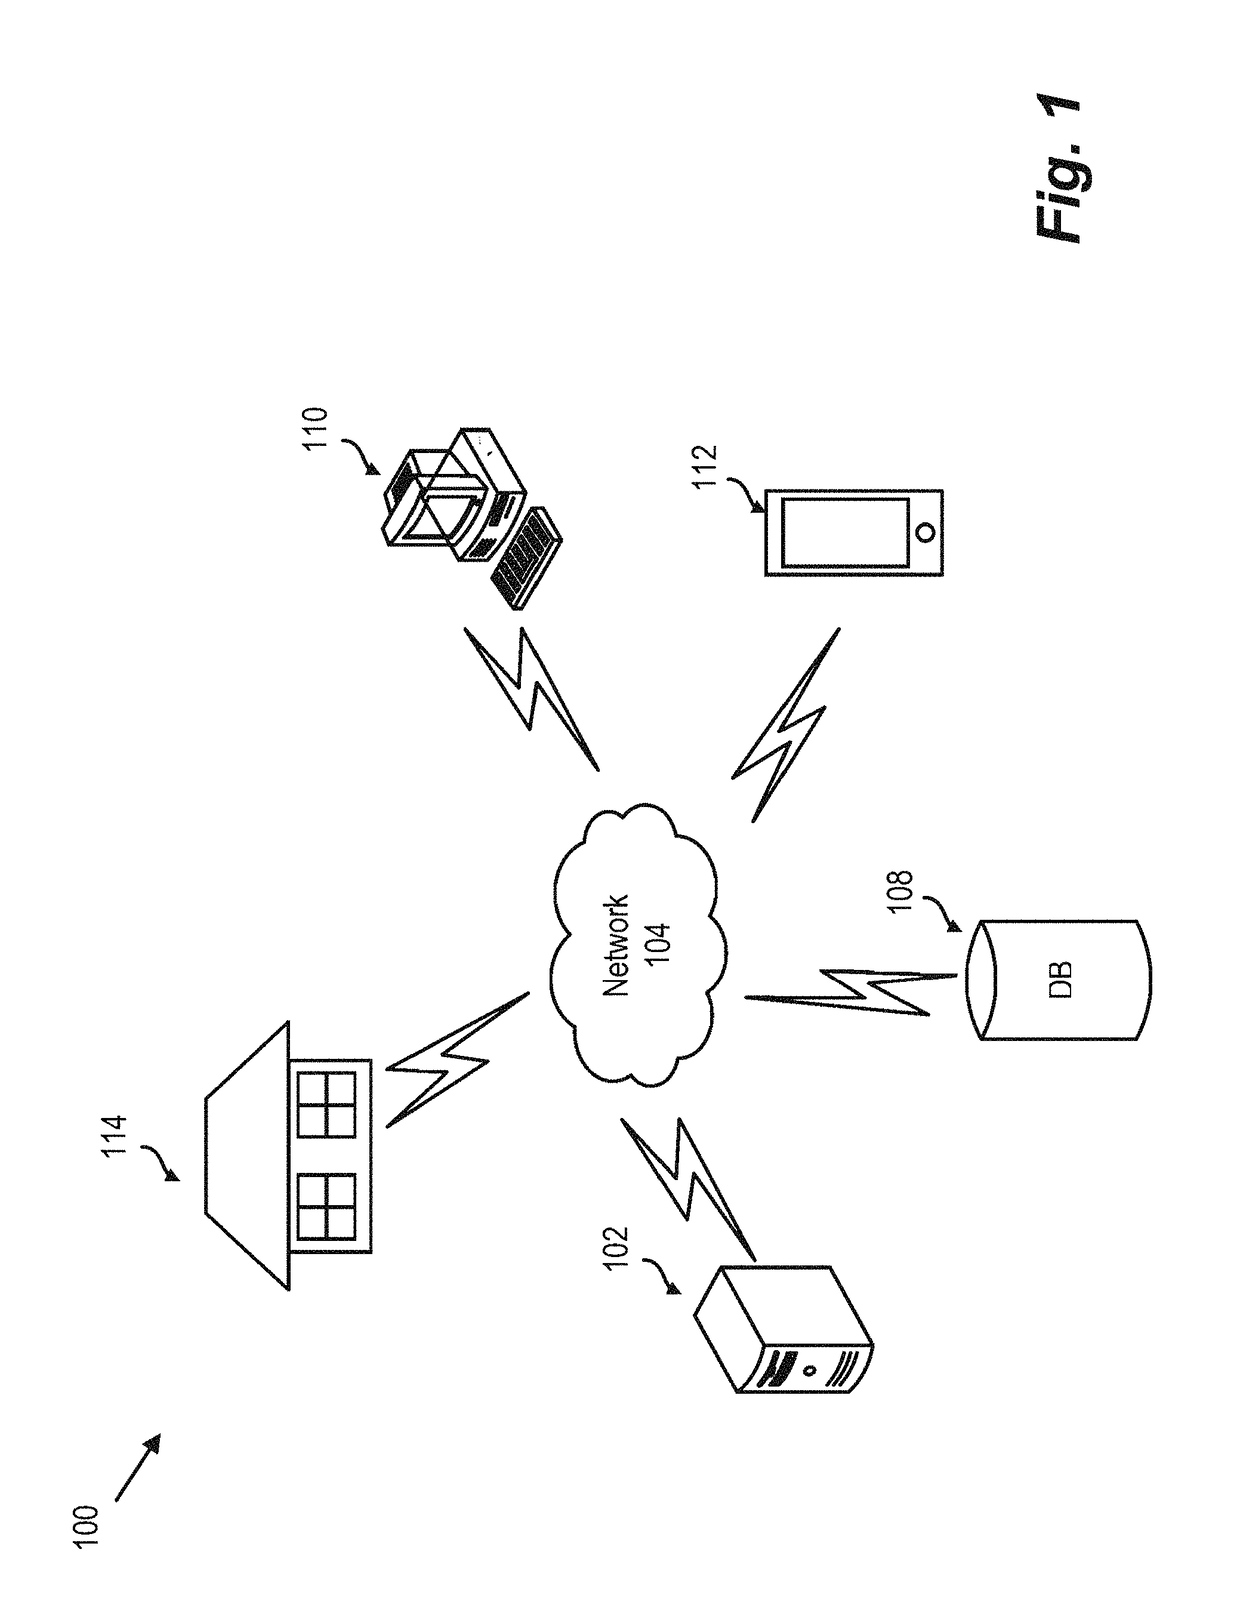 System, device, and method for controlling smart windows